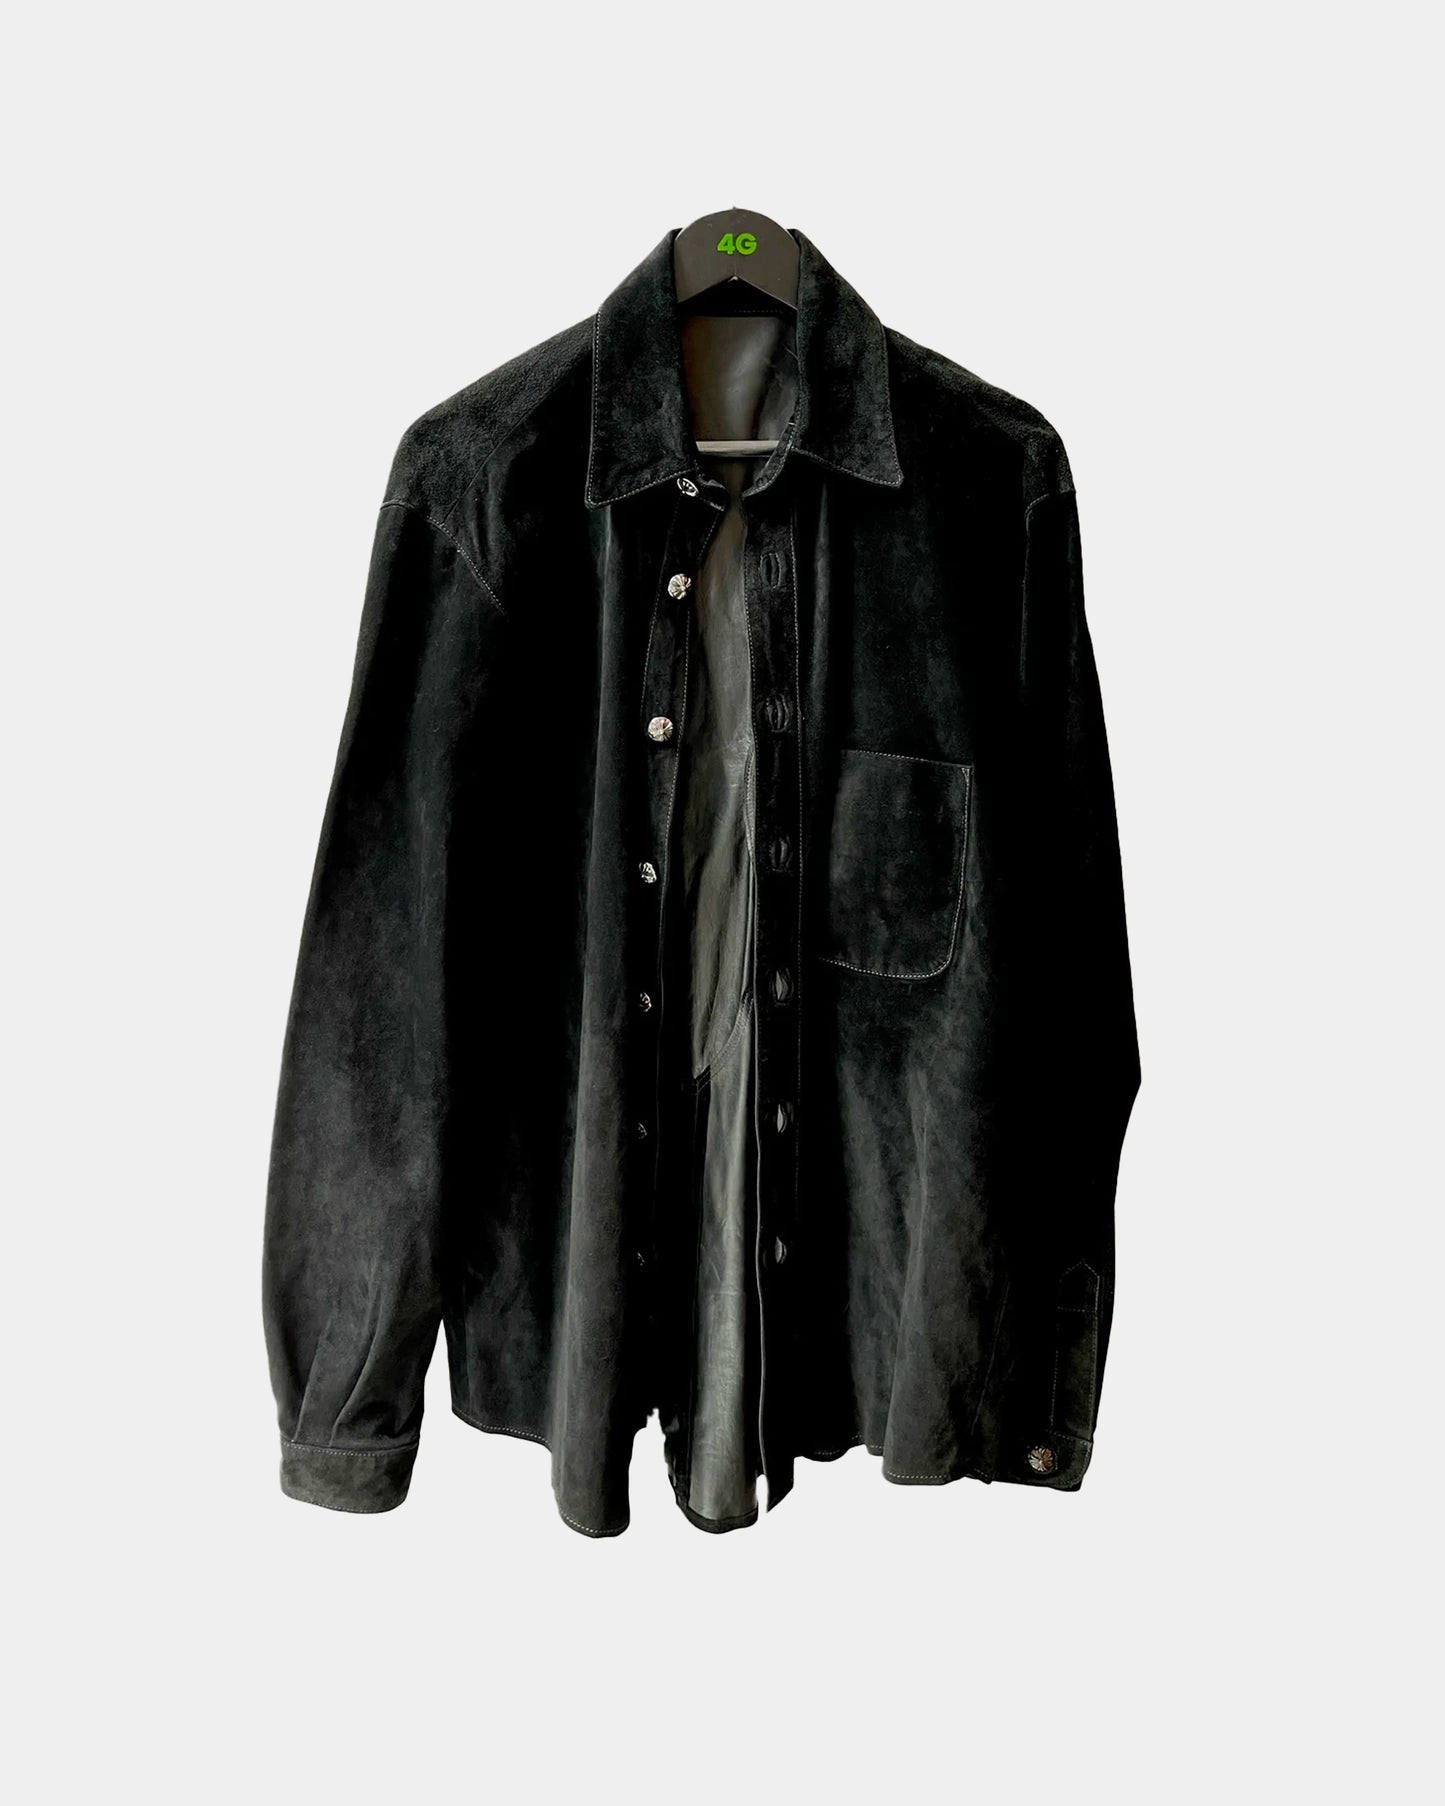 Chrome Hearts Black Suede Leather Jacket Shirt XL 4Gseller